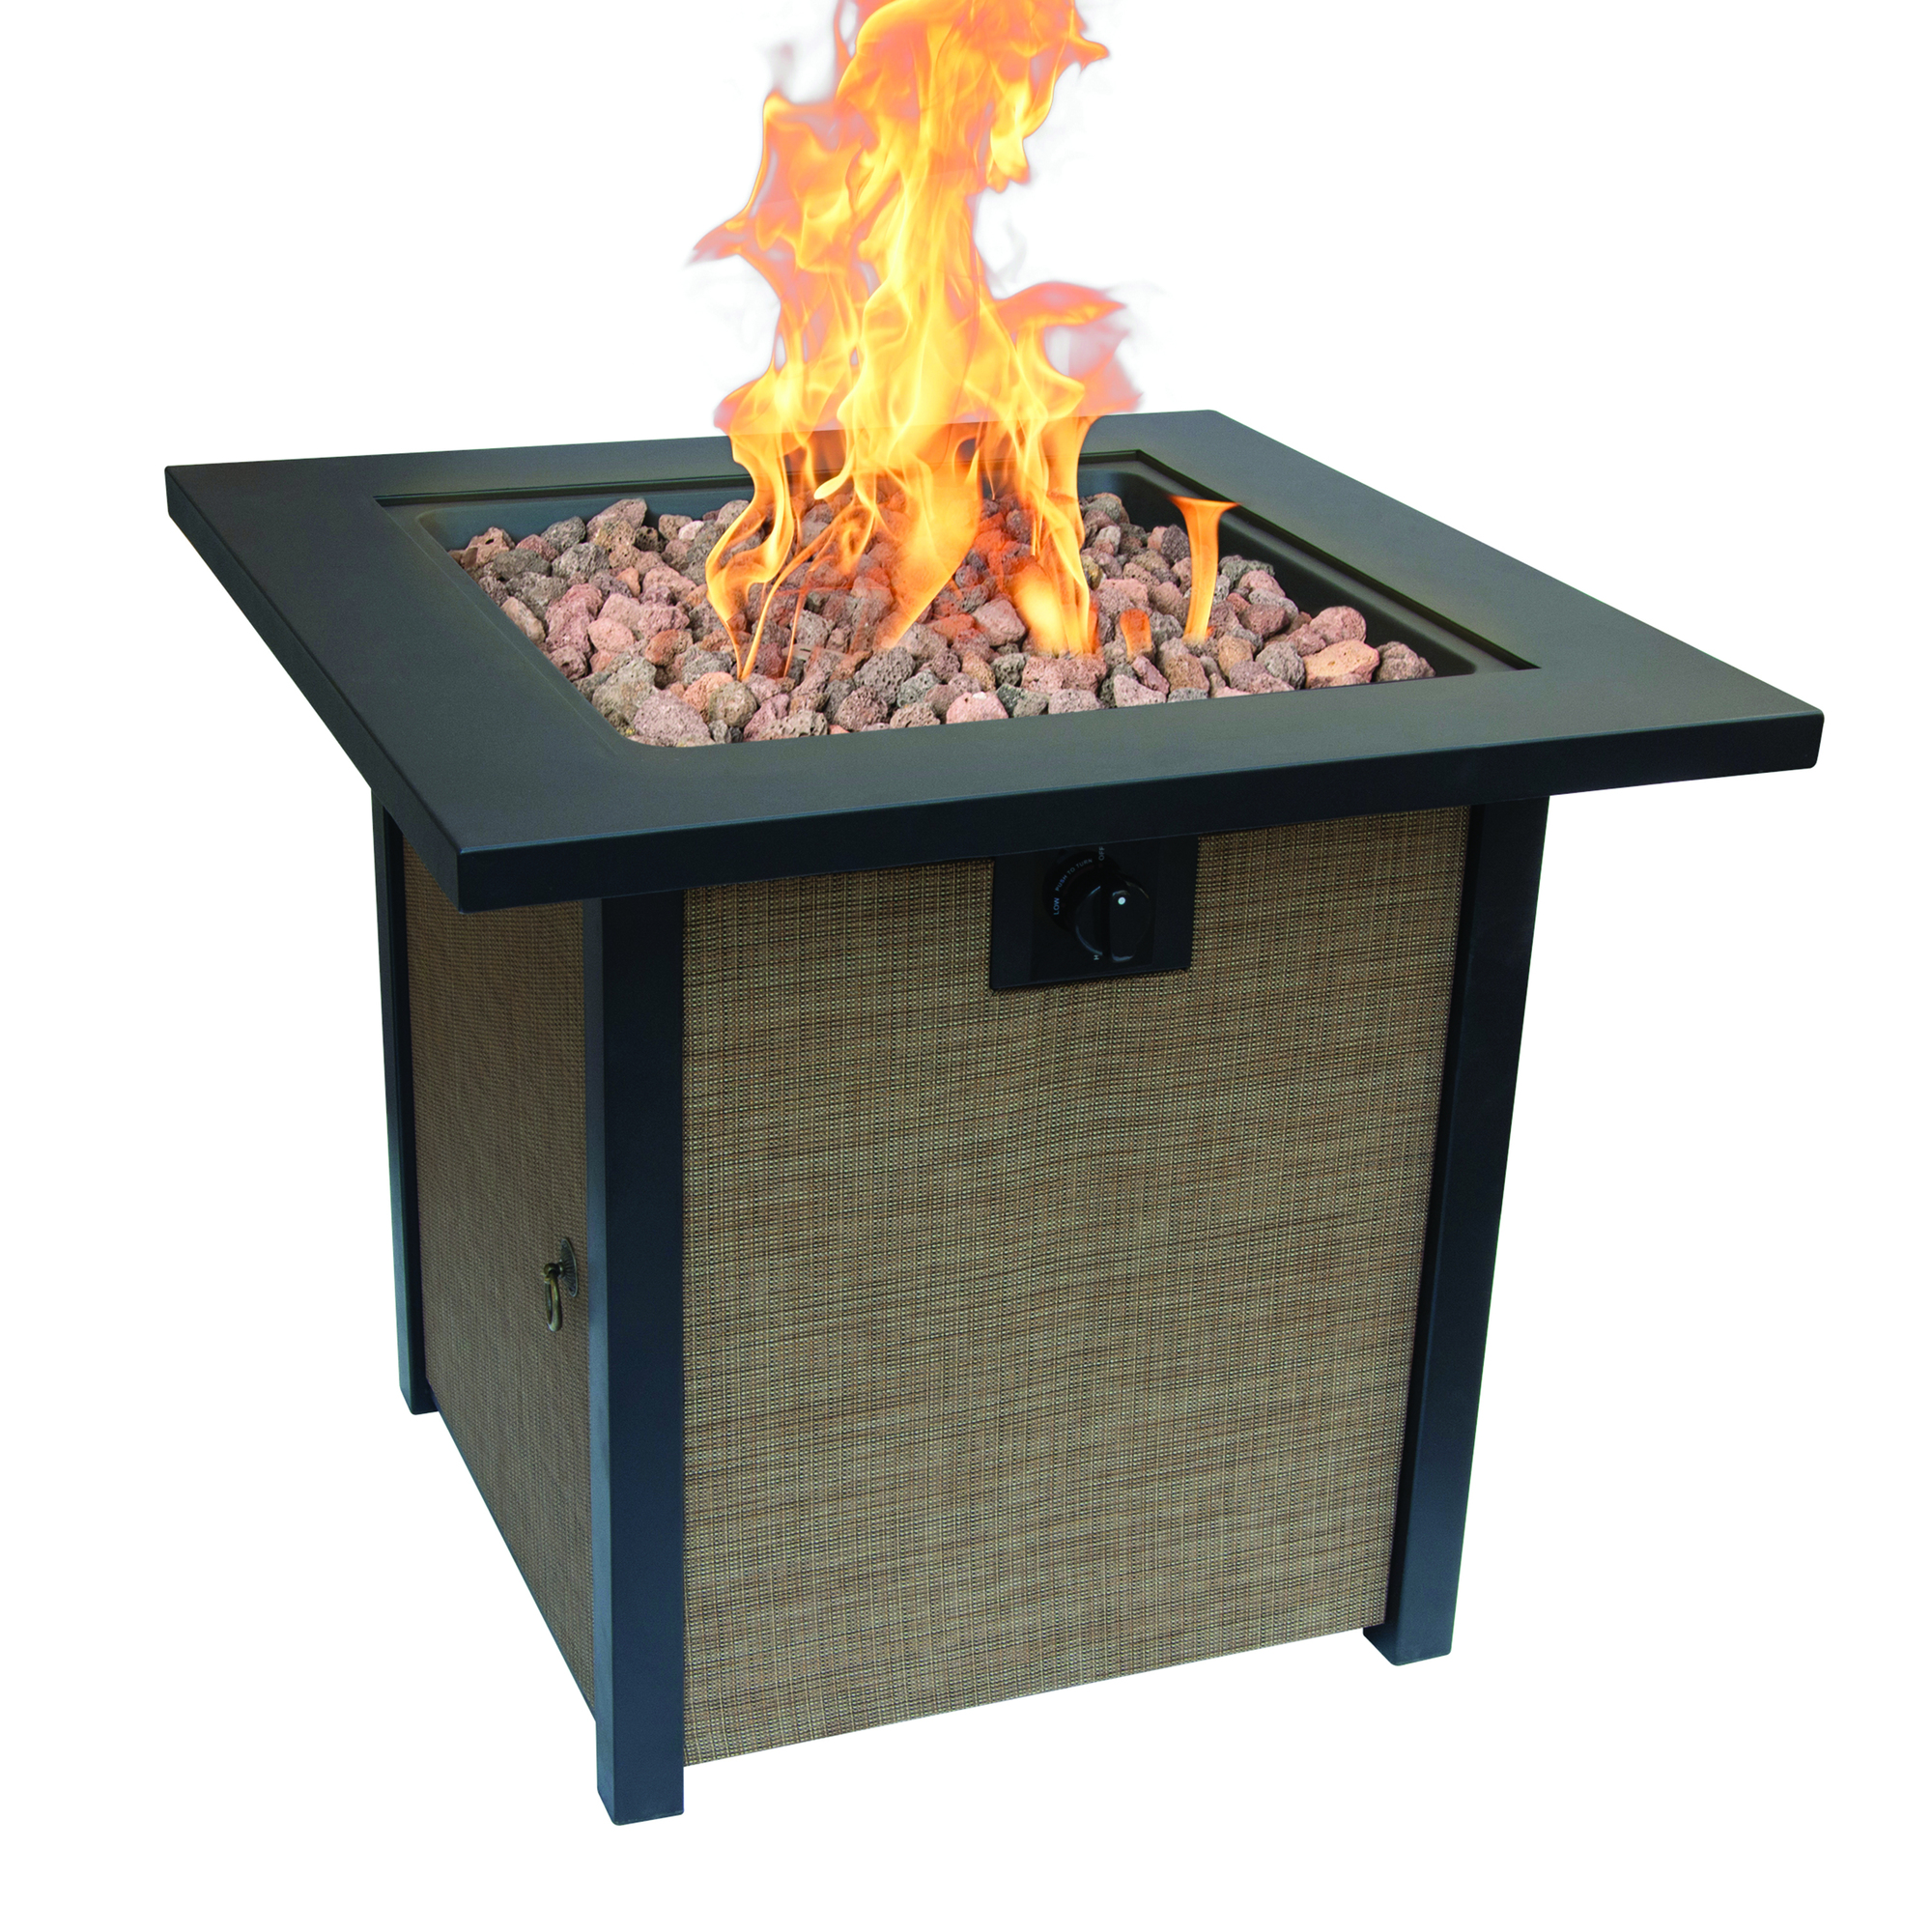 Bond, Woodleaf 28Inch Gas Fire Pit, Fuel Type Propane, Material Magnesium, Model 51846